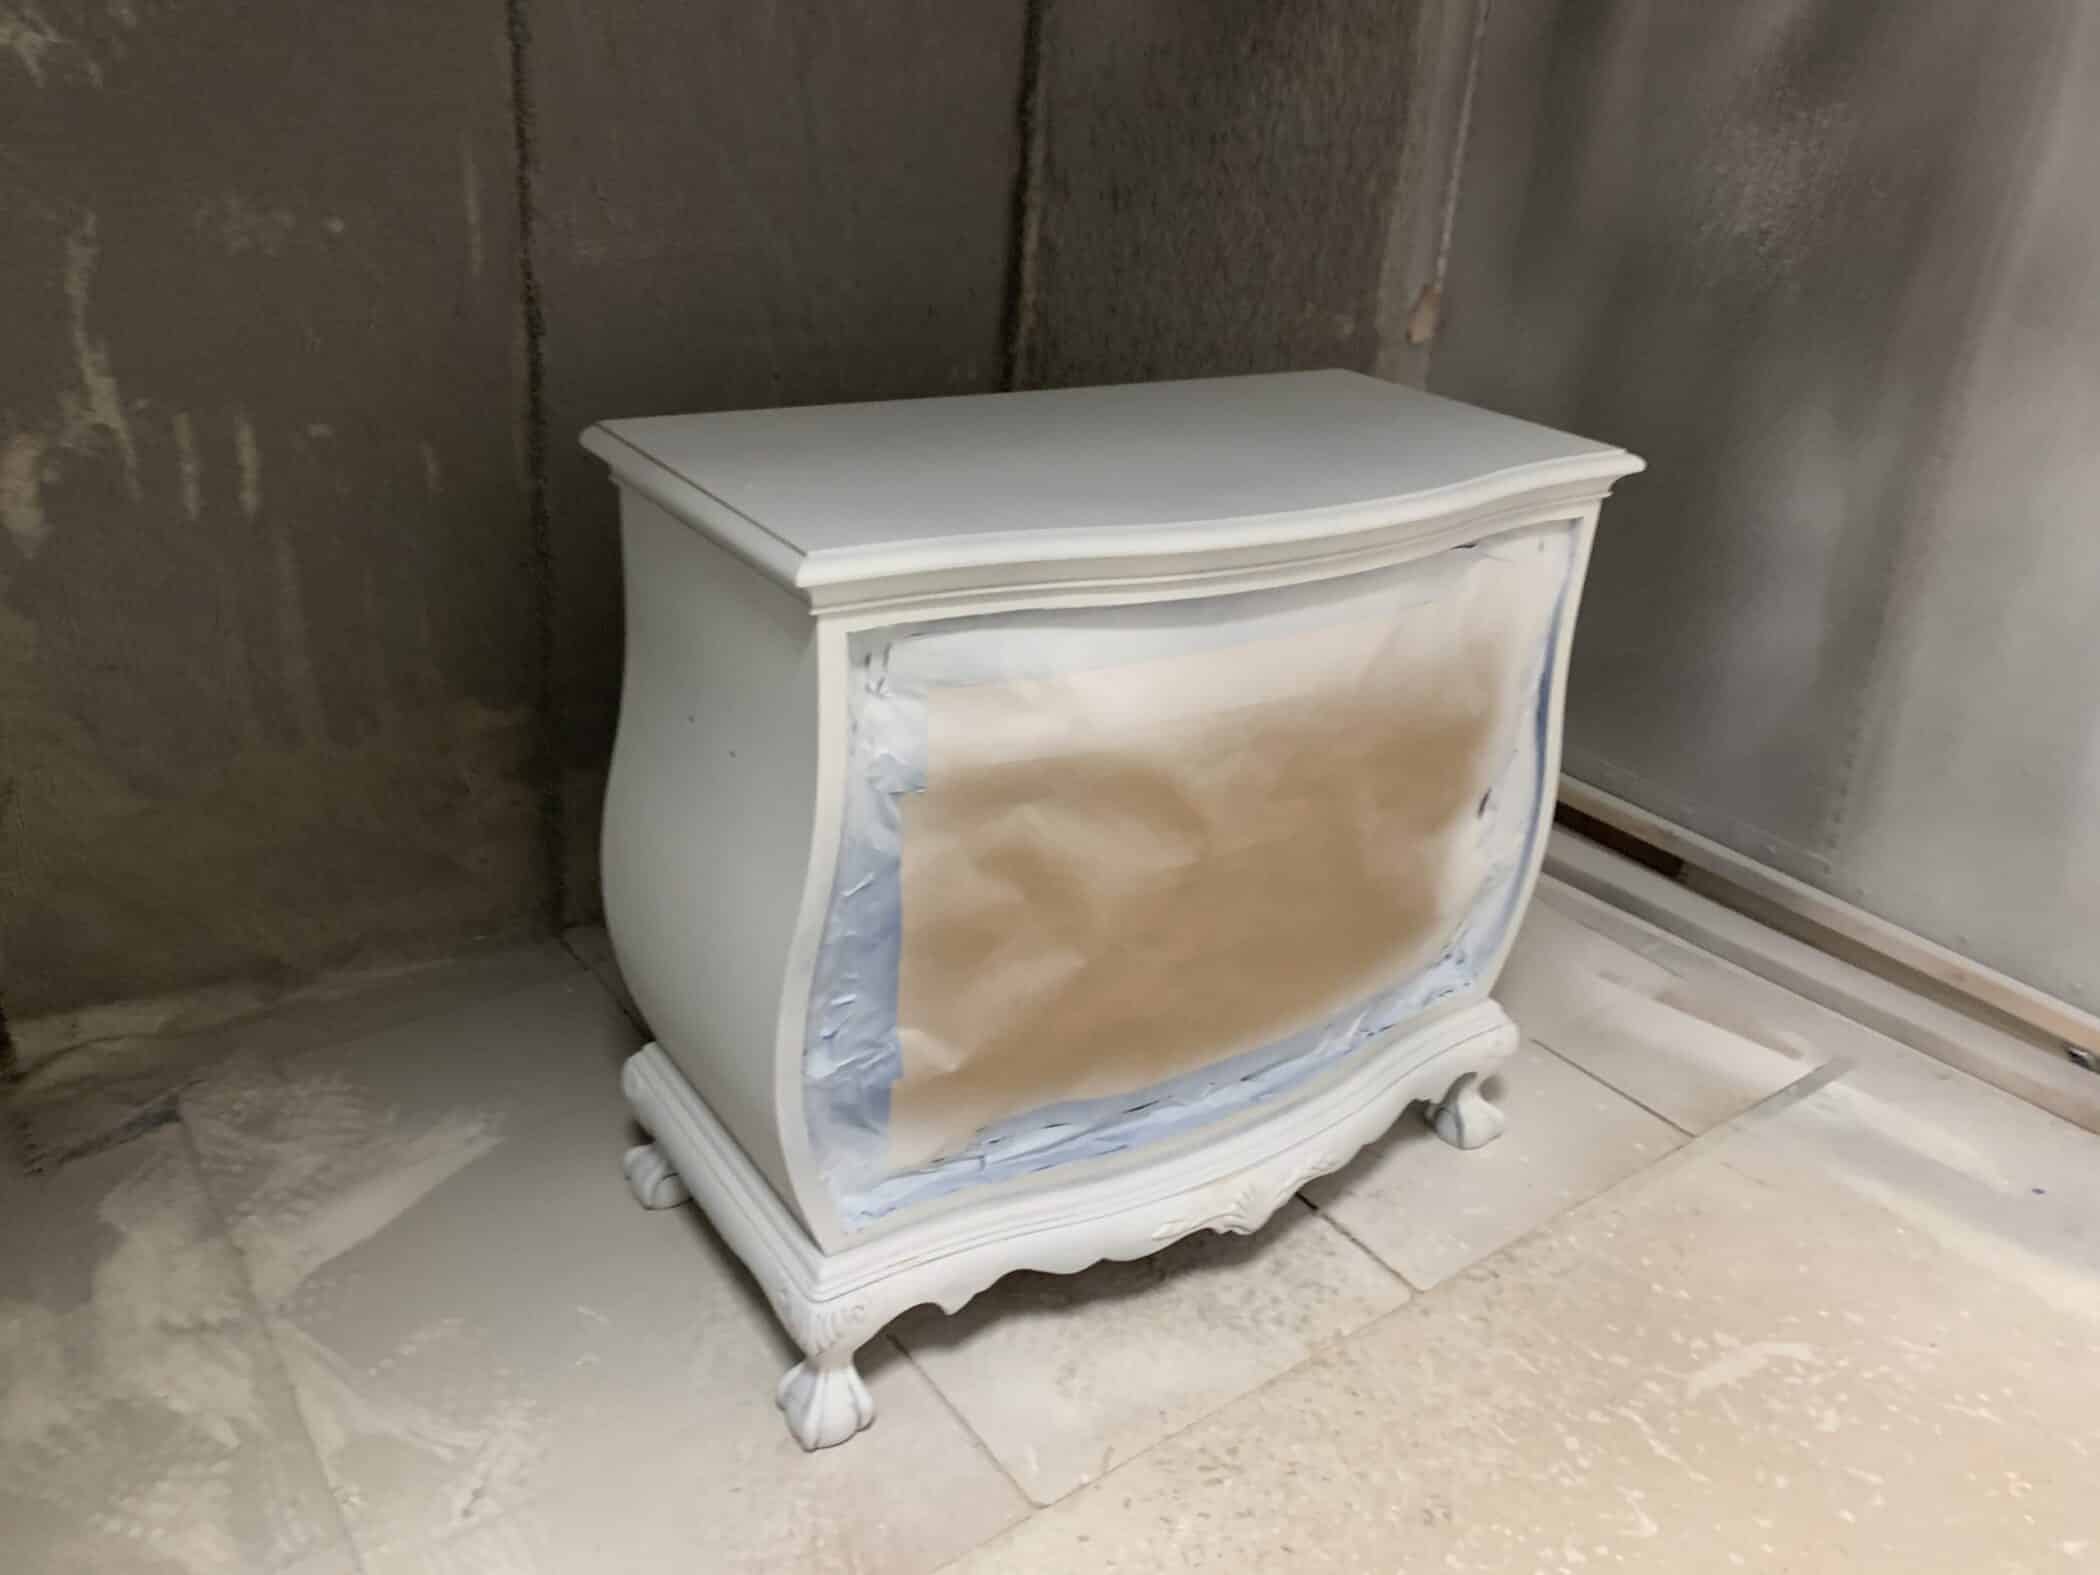 Painting your old furniture - first coat primer